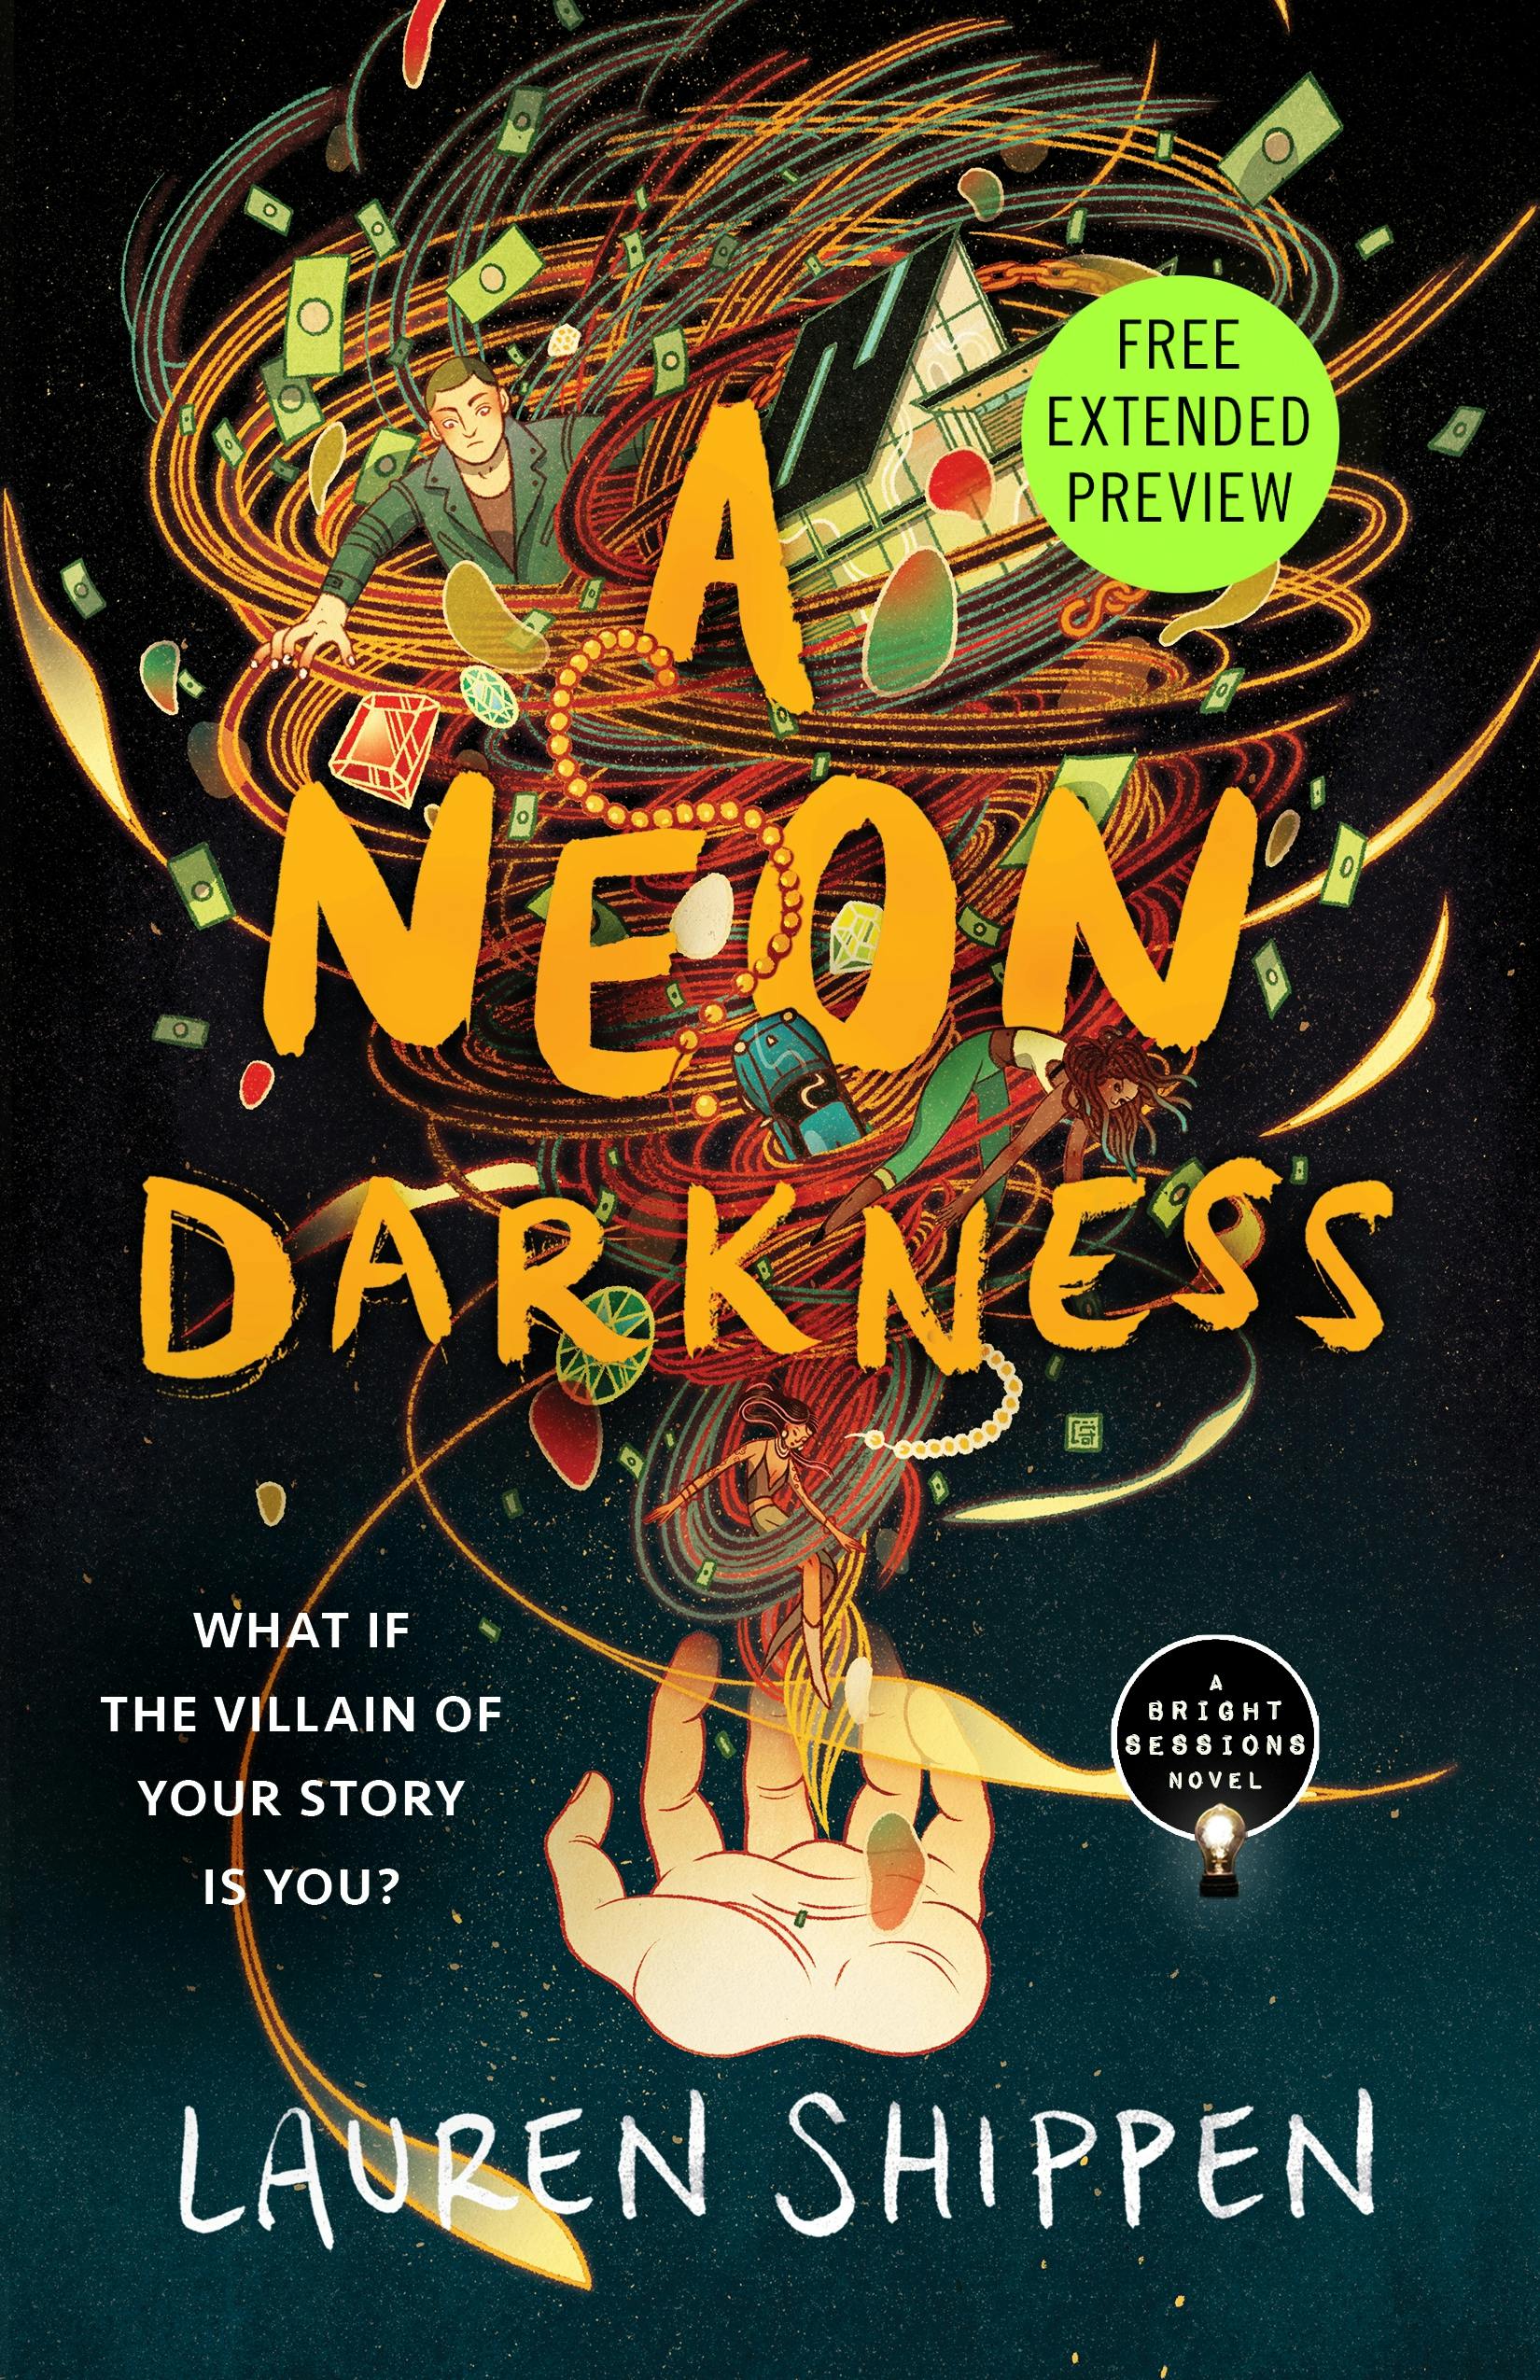 Cover for the book titled as: A Neon Darkness Sneak Peek